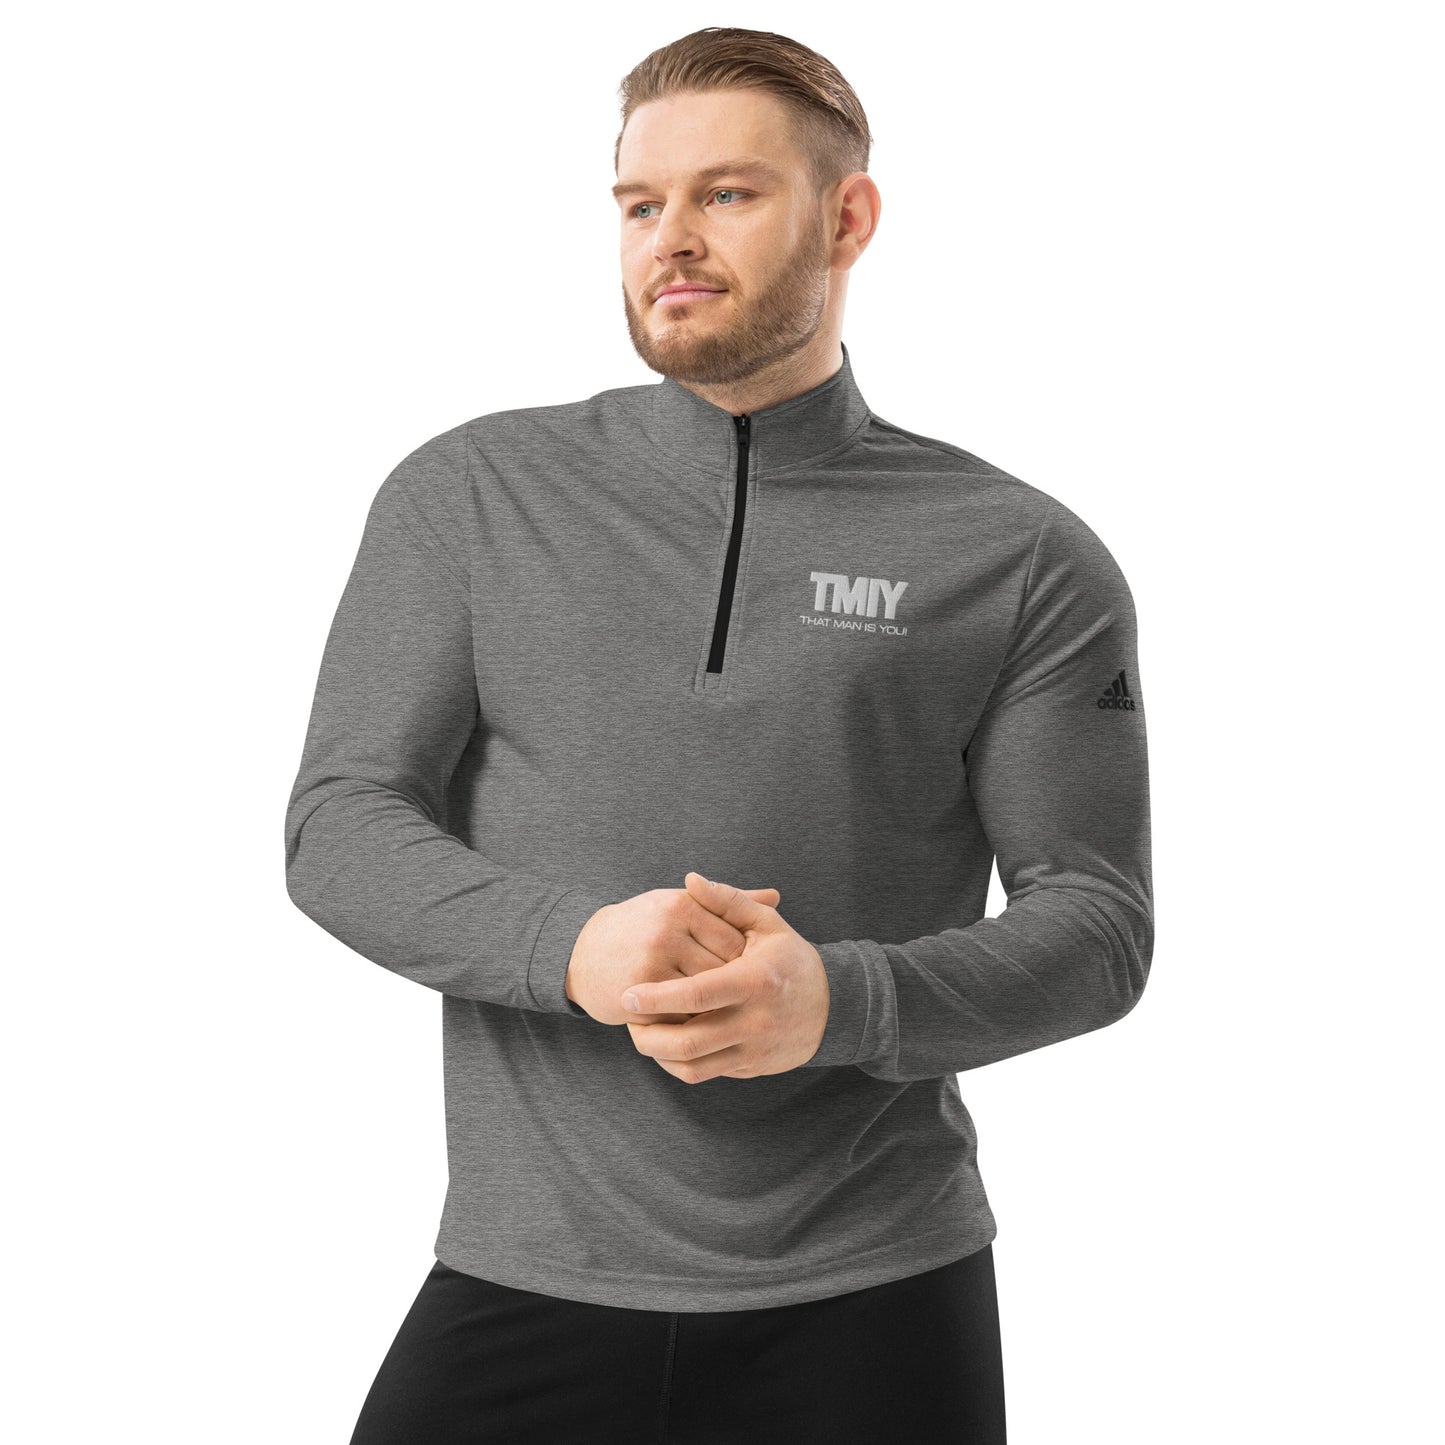 TMIY Quarter Zip Embroidered Pullover